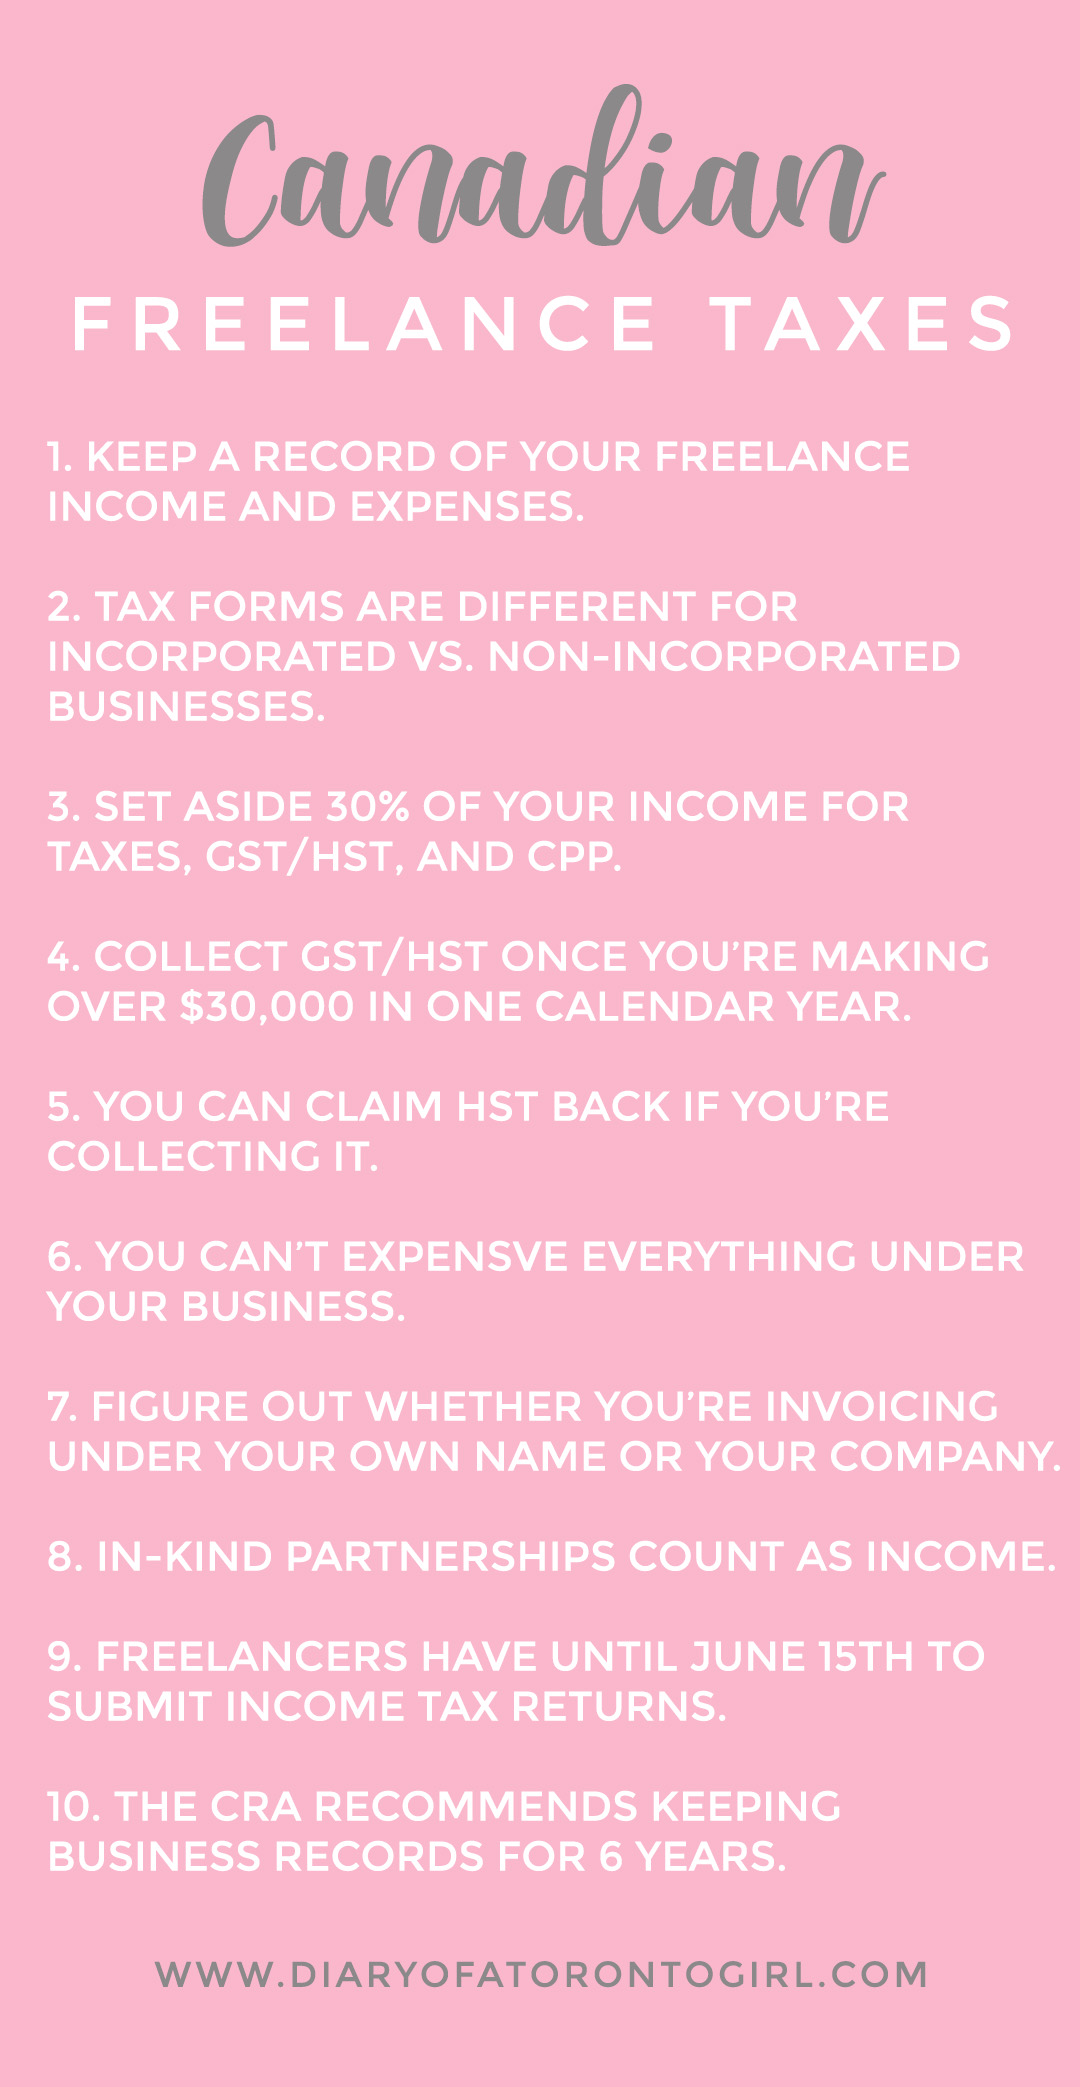 10 things to know about Canadian freelance taxes